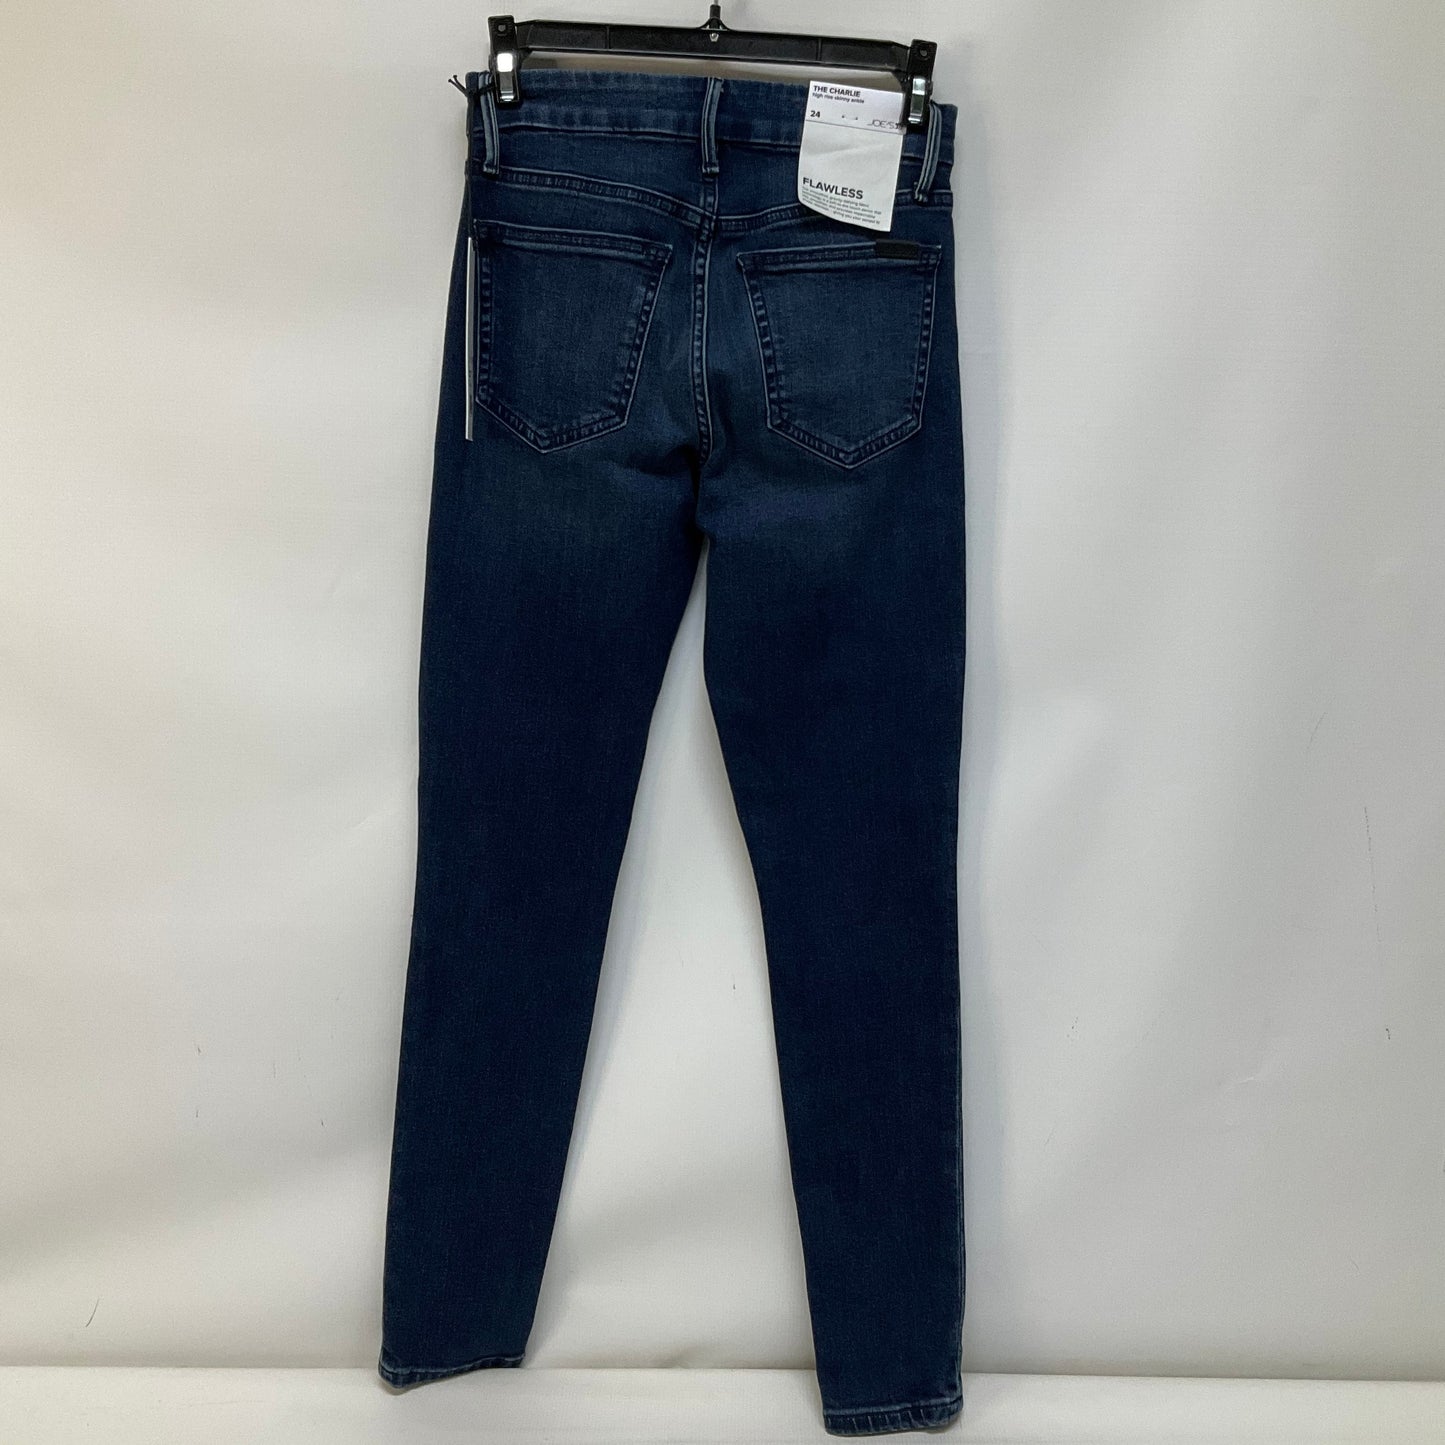 Jeans Skinny By Joes Jeans  Size: 0